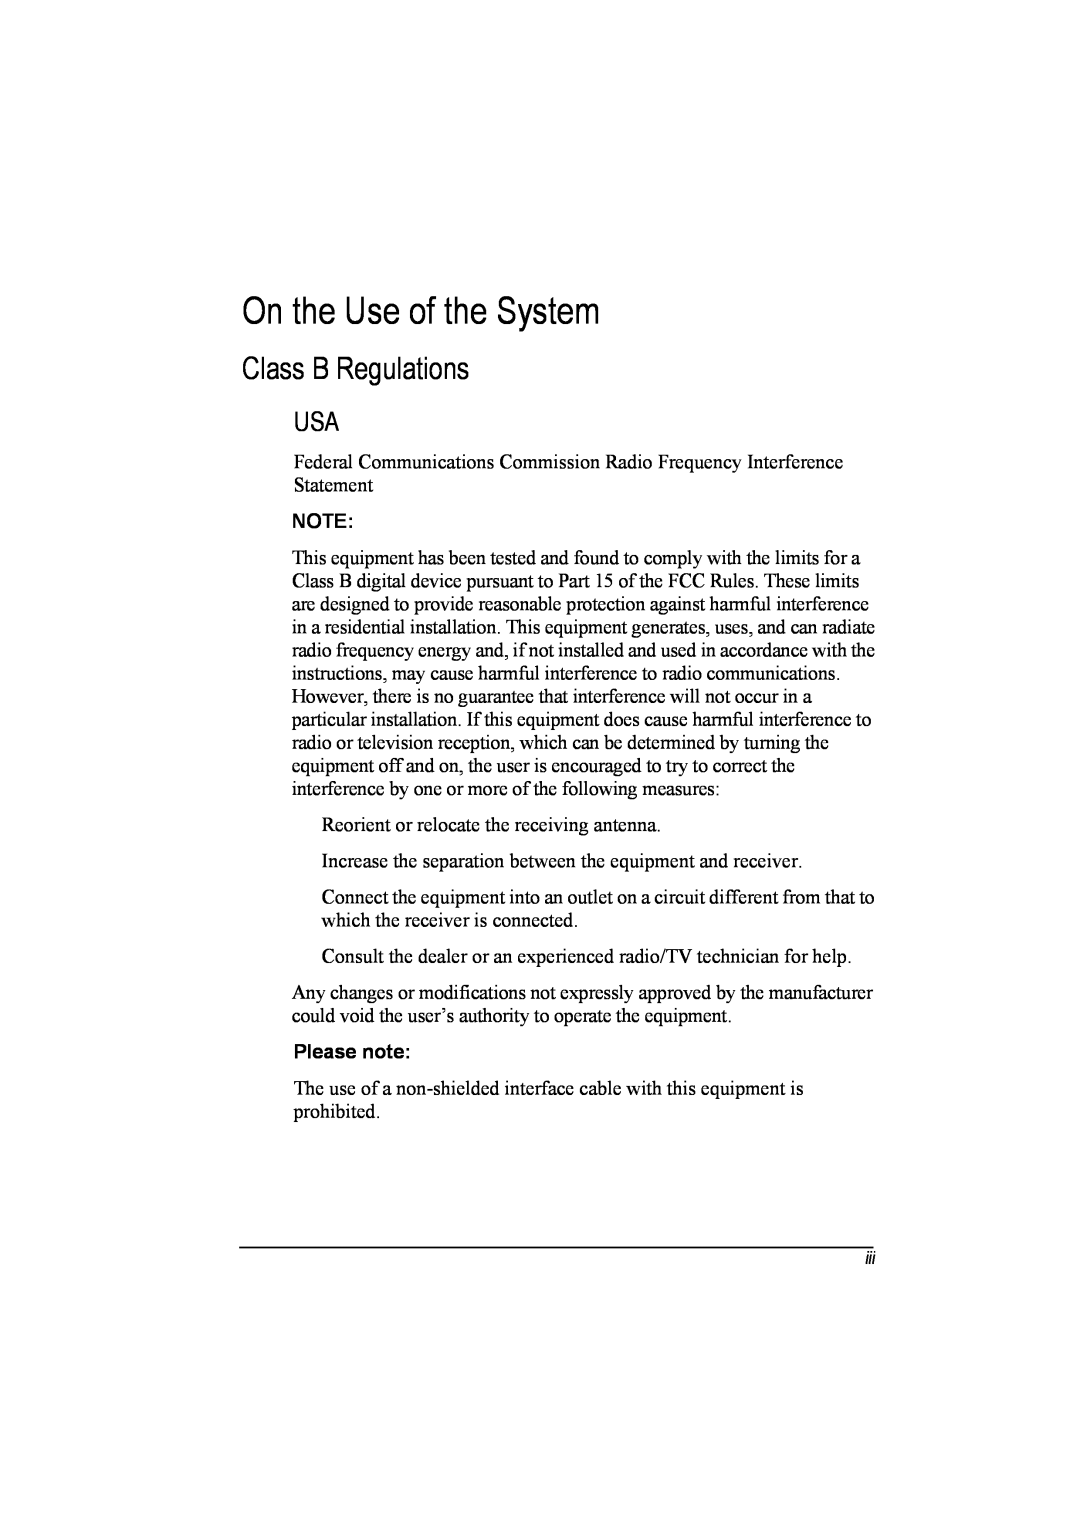 TAG 20 Series manual On the Use of the System, Class B Regulations, Please note 